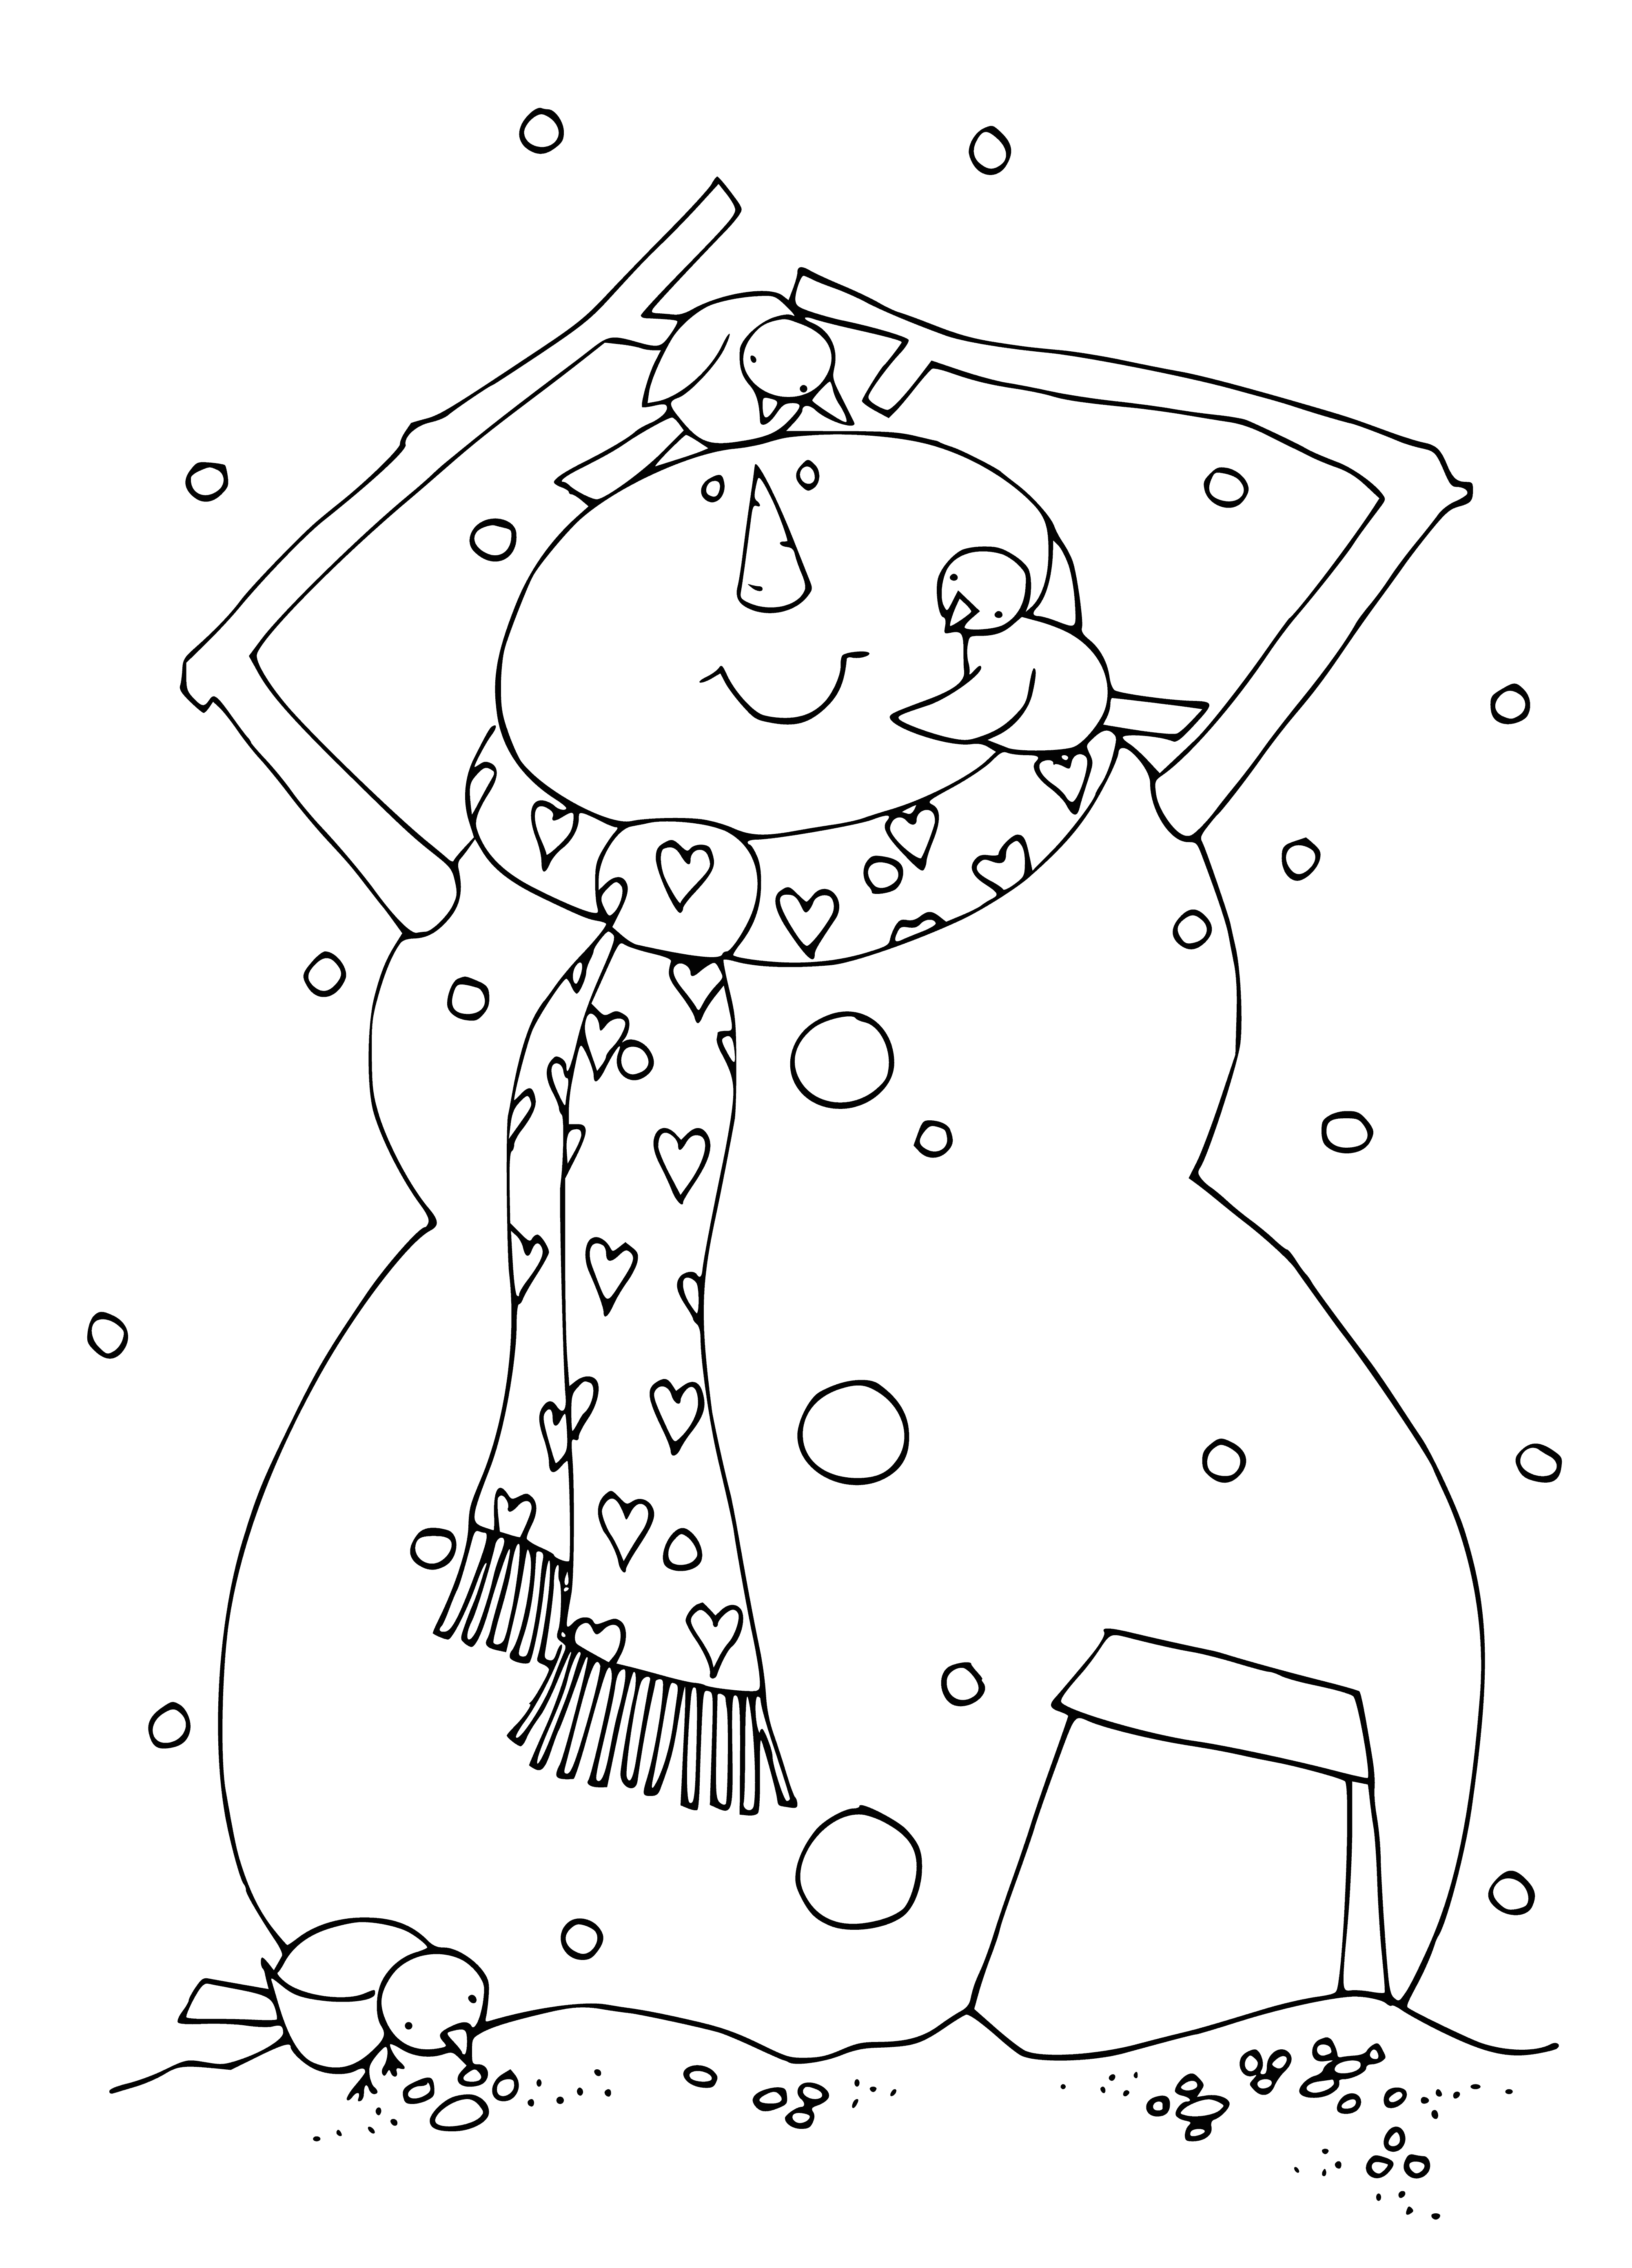 coloring page: Snowman is feeding birds; top hat, red scarf. Bluebird, yellow finch, robin, sparrow & cardinal.